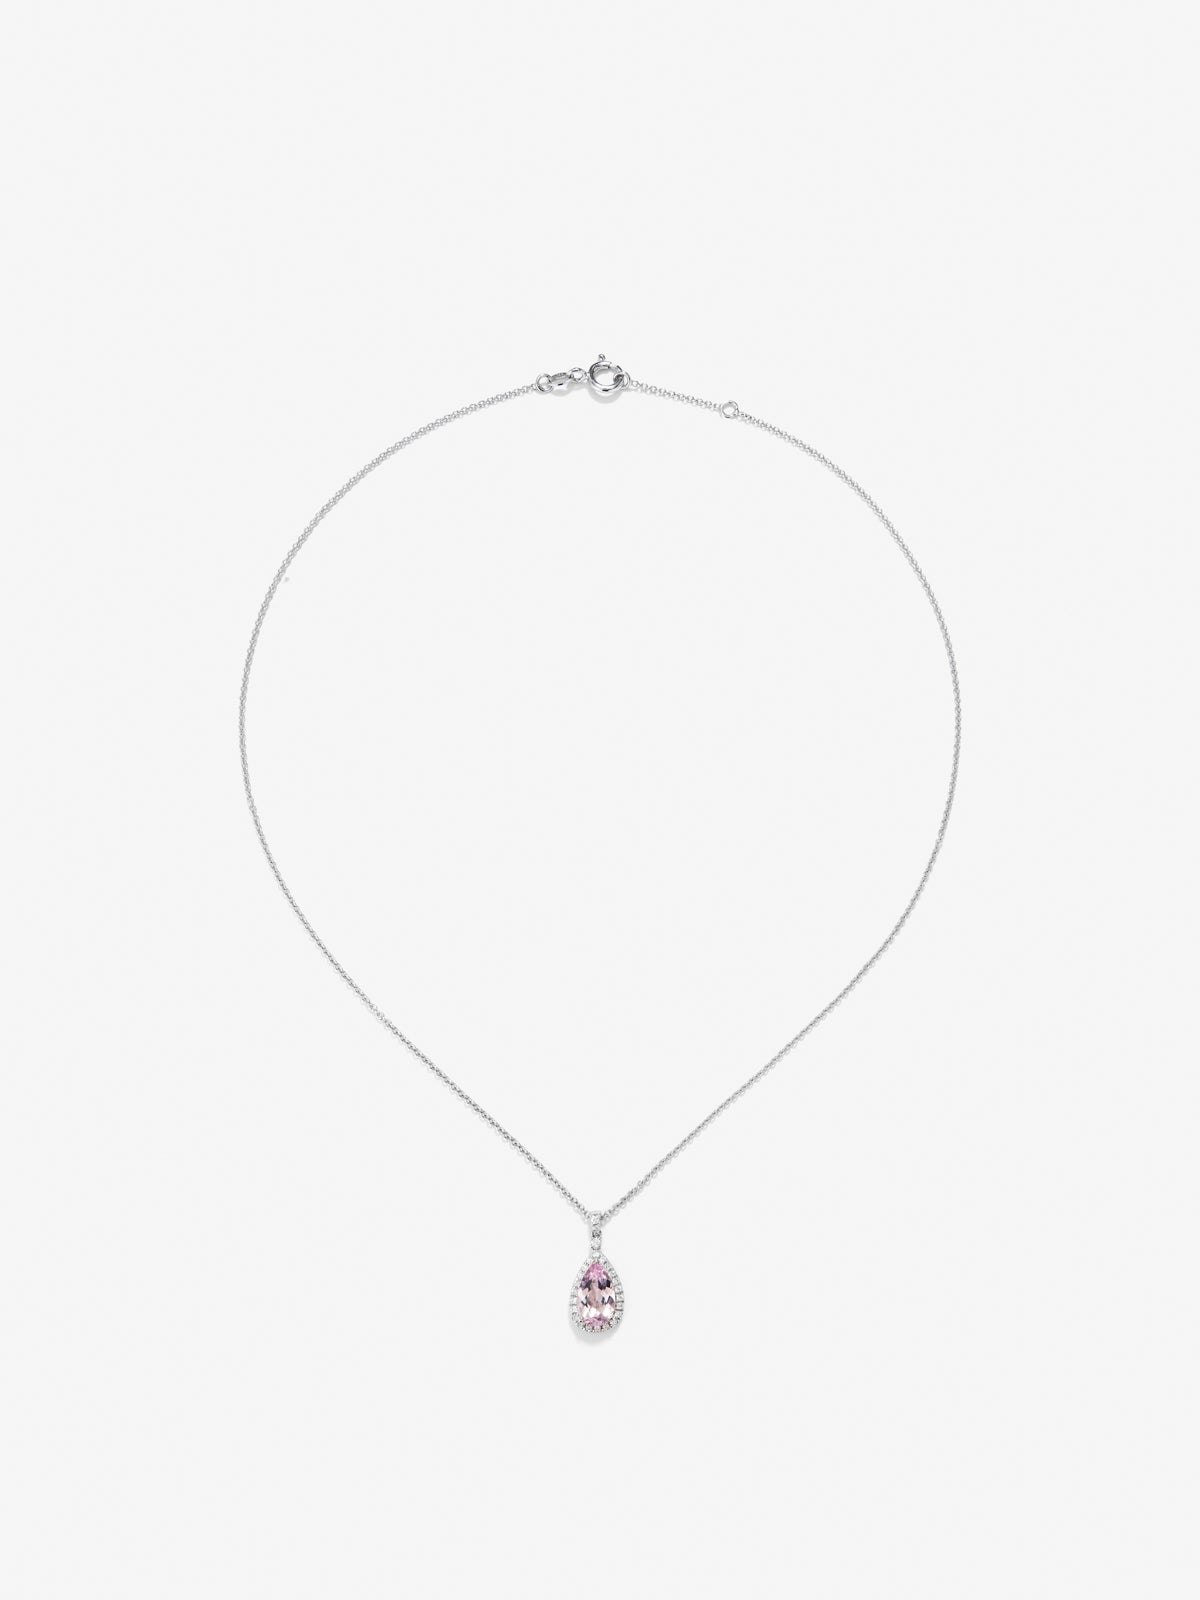 18K white gold pendant with pear-cut pink morganite measuring 1.44 and 29 brilliant-cut diamonds with a total of 0.19 cts